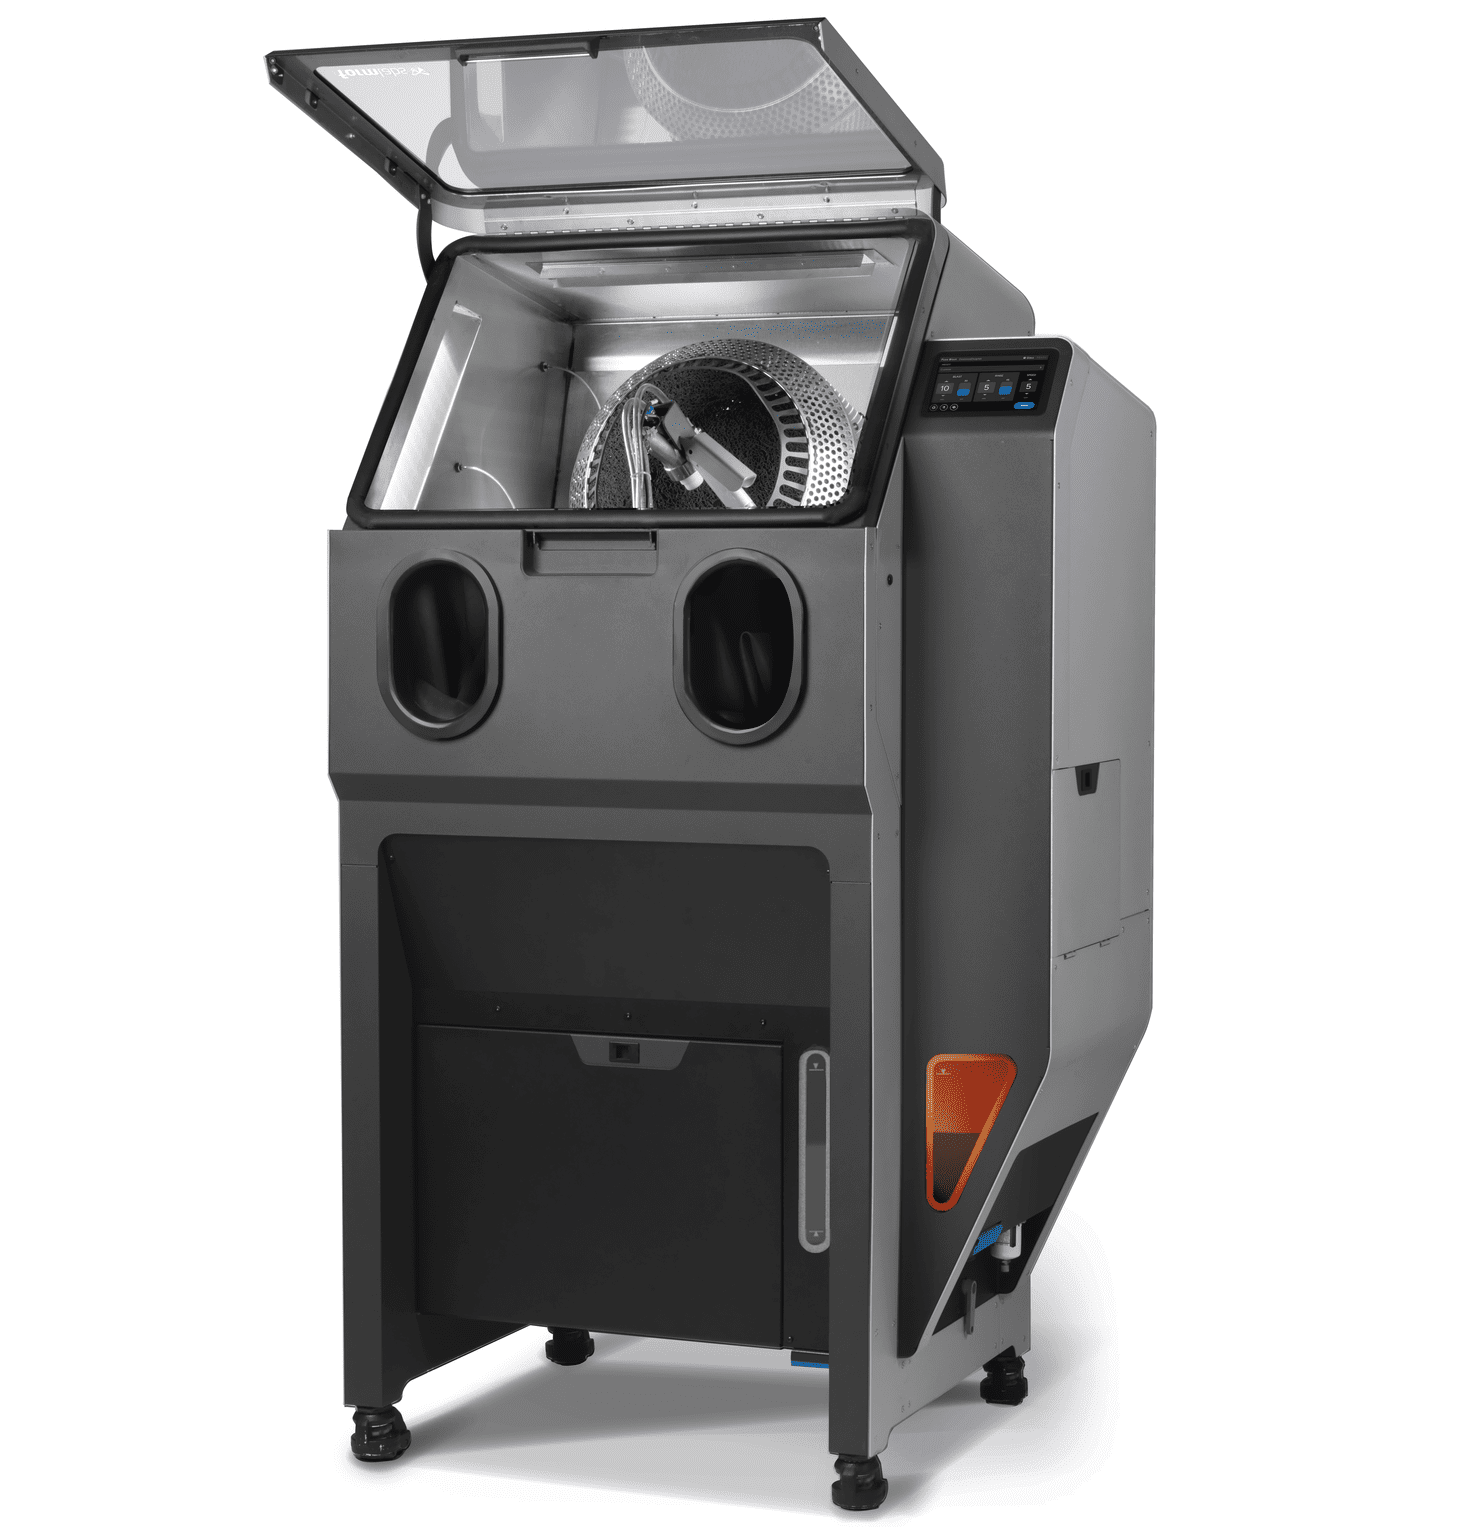 Image shows Formlabs Fuse Blast, an automated SLS post-processing machine